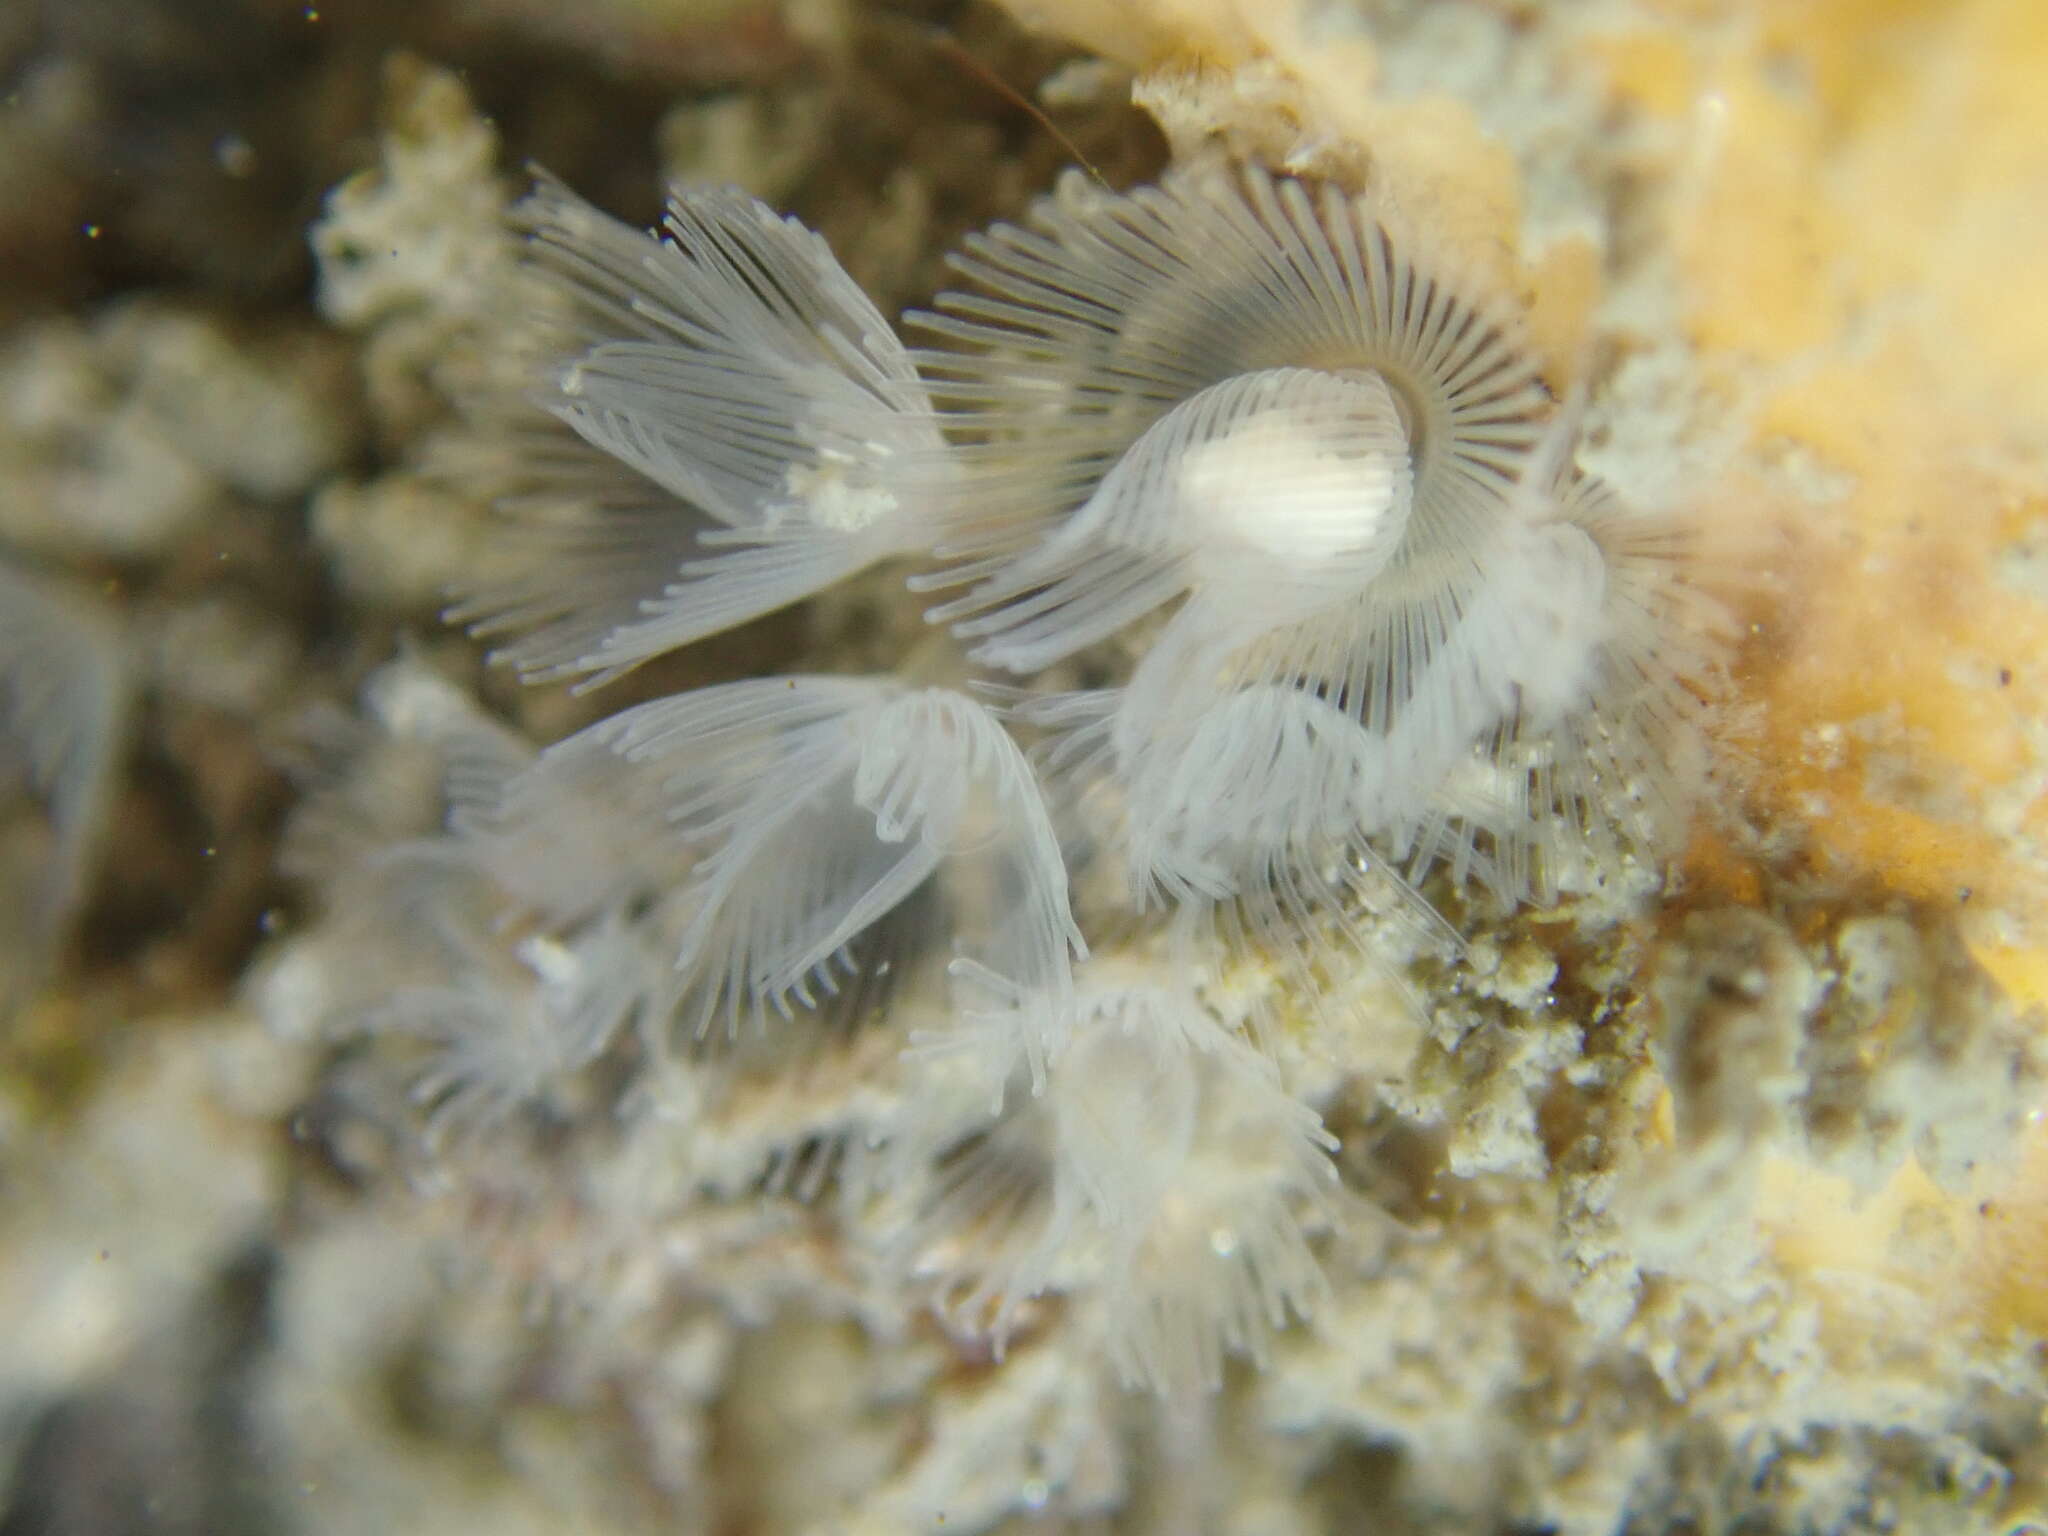 Image of white colonial phoronid